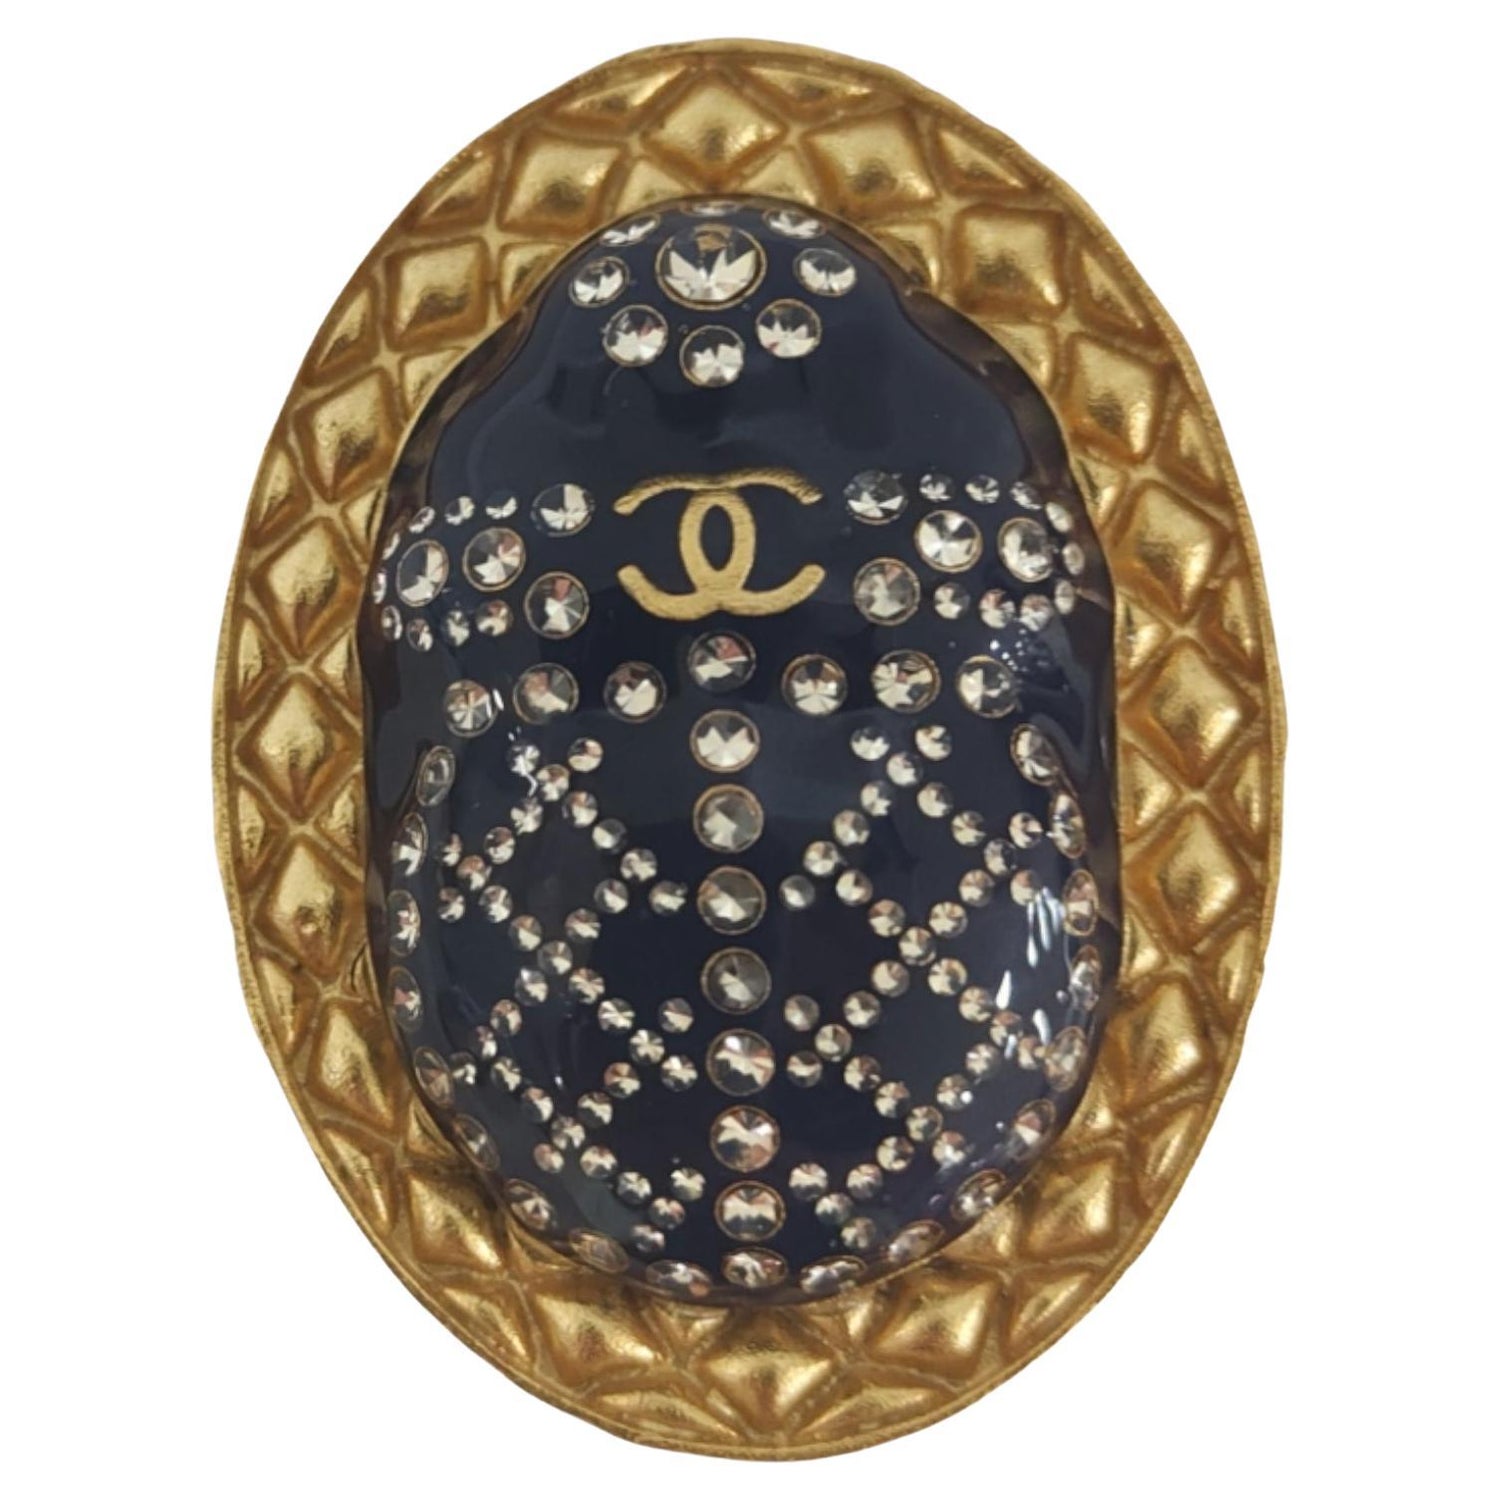 Chanel Cc Brooch 2019 - 4 For Sale on 1stDibs